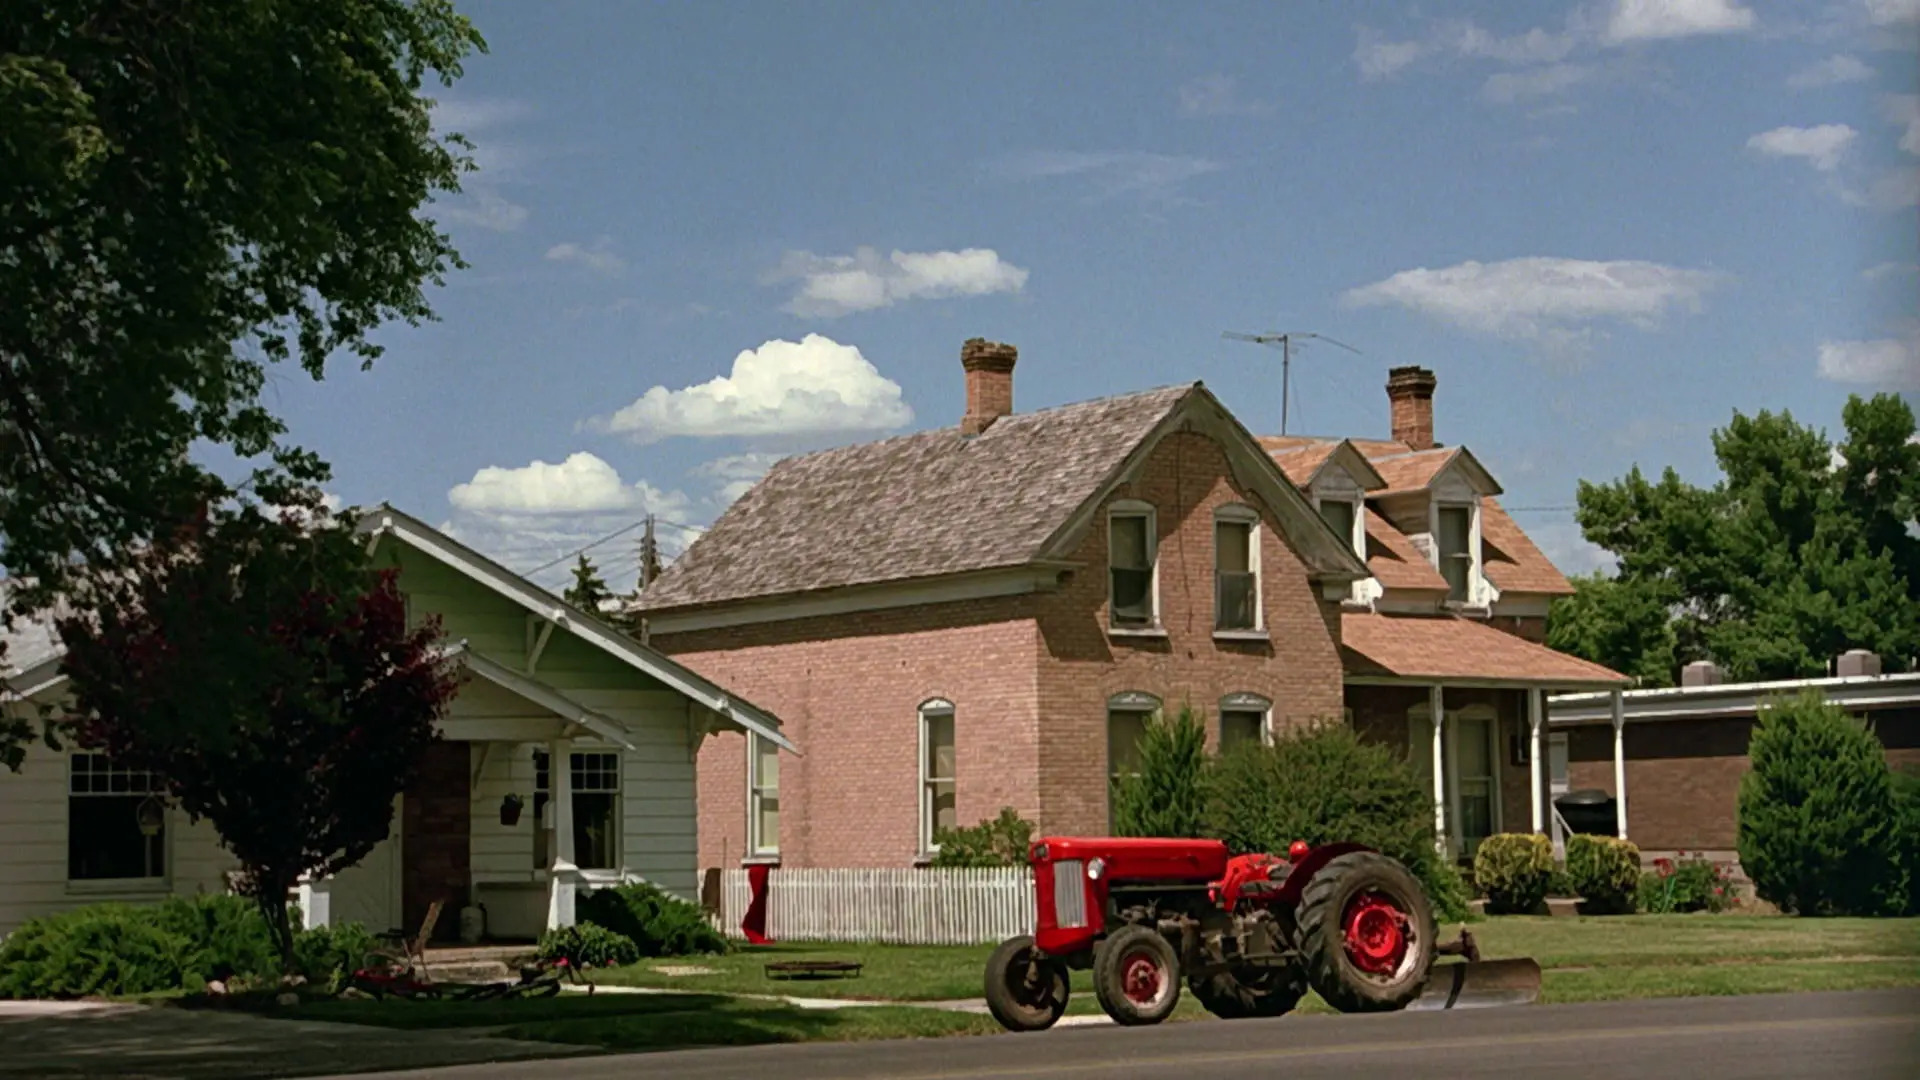 Where Was Footloose Filmed? 1984 Movie Filming Locations